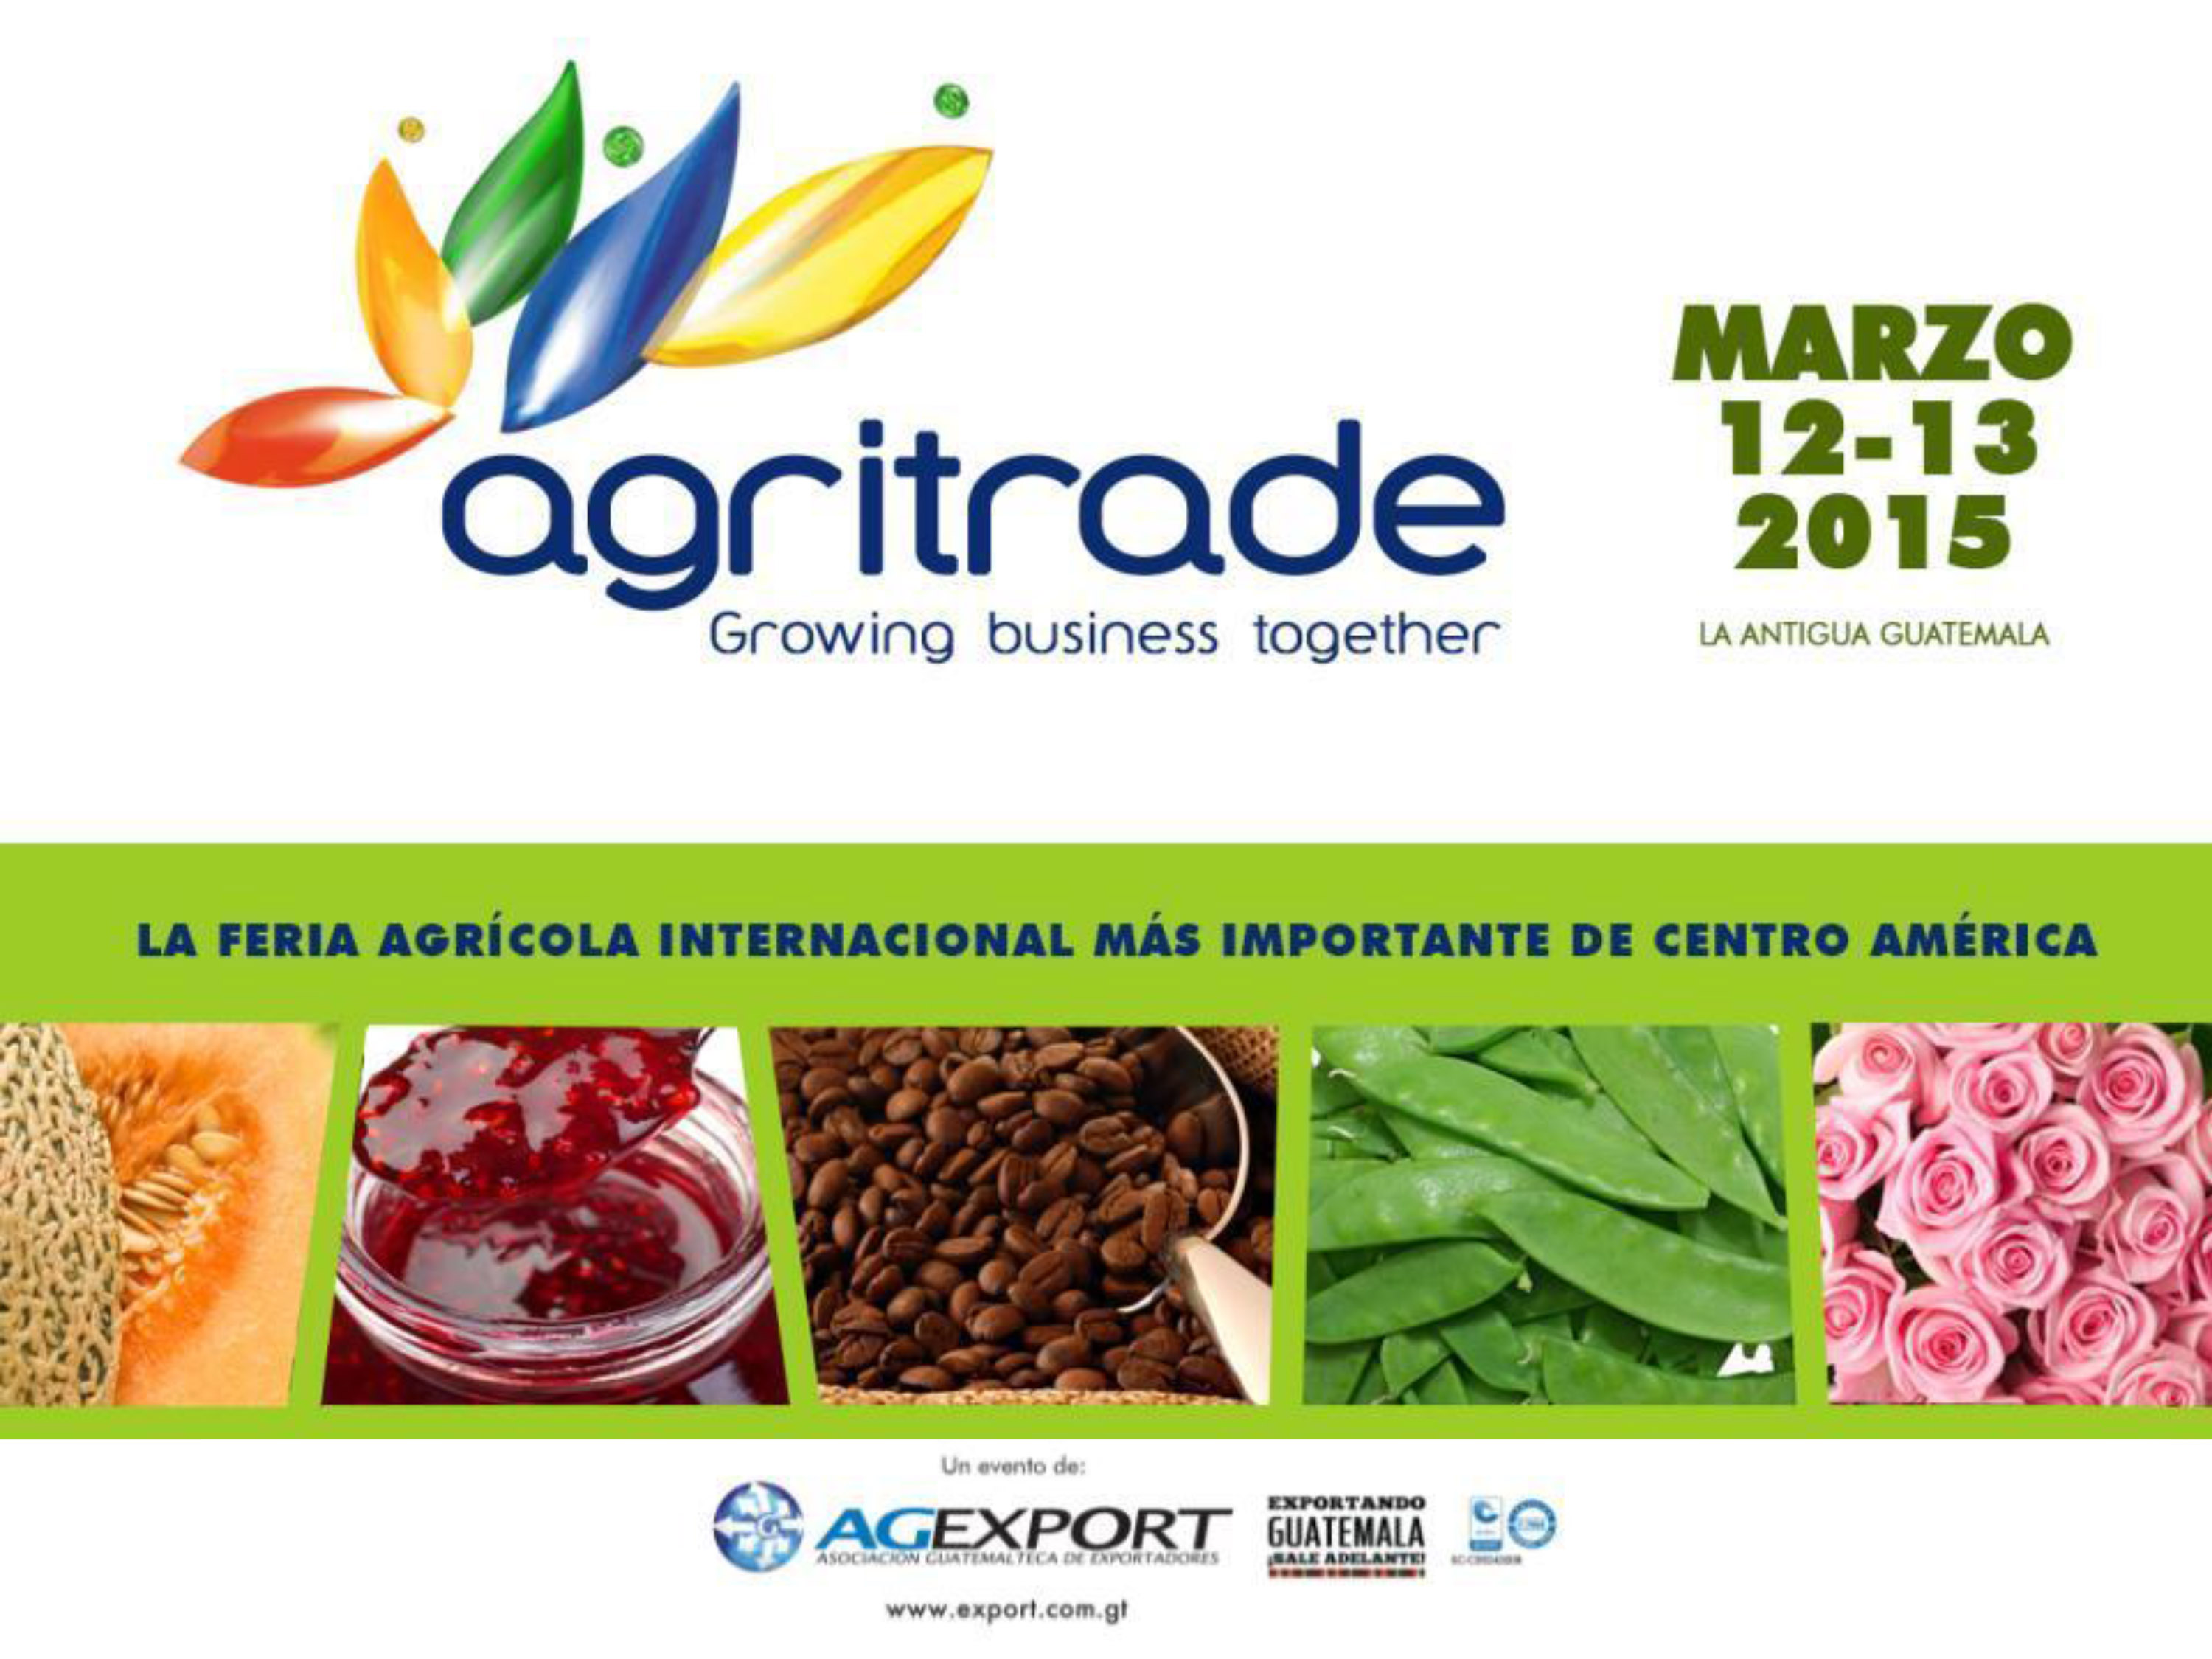 Agritrade